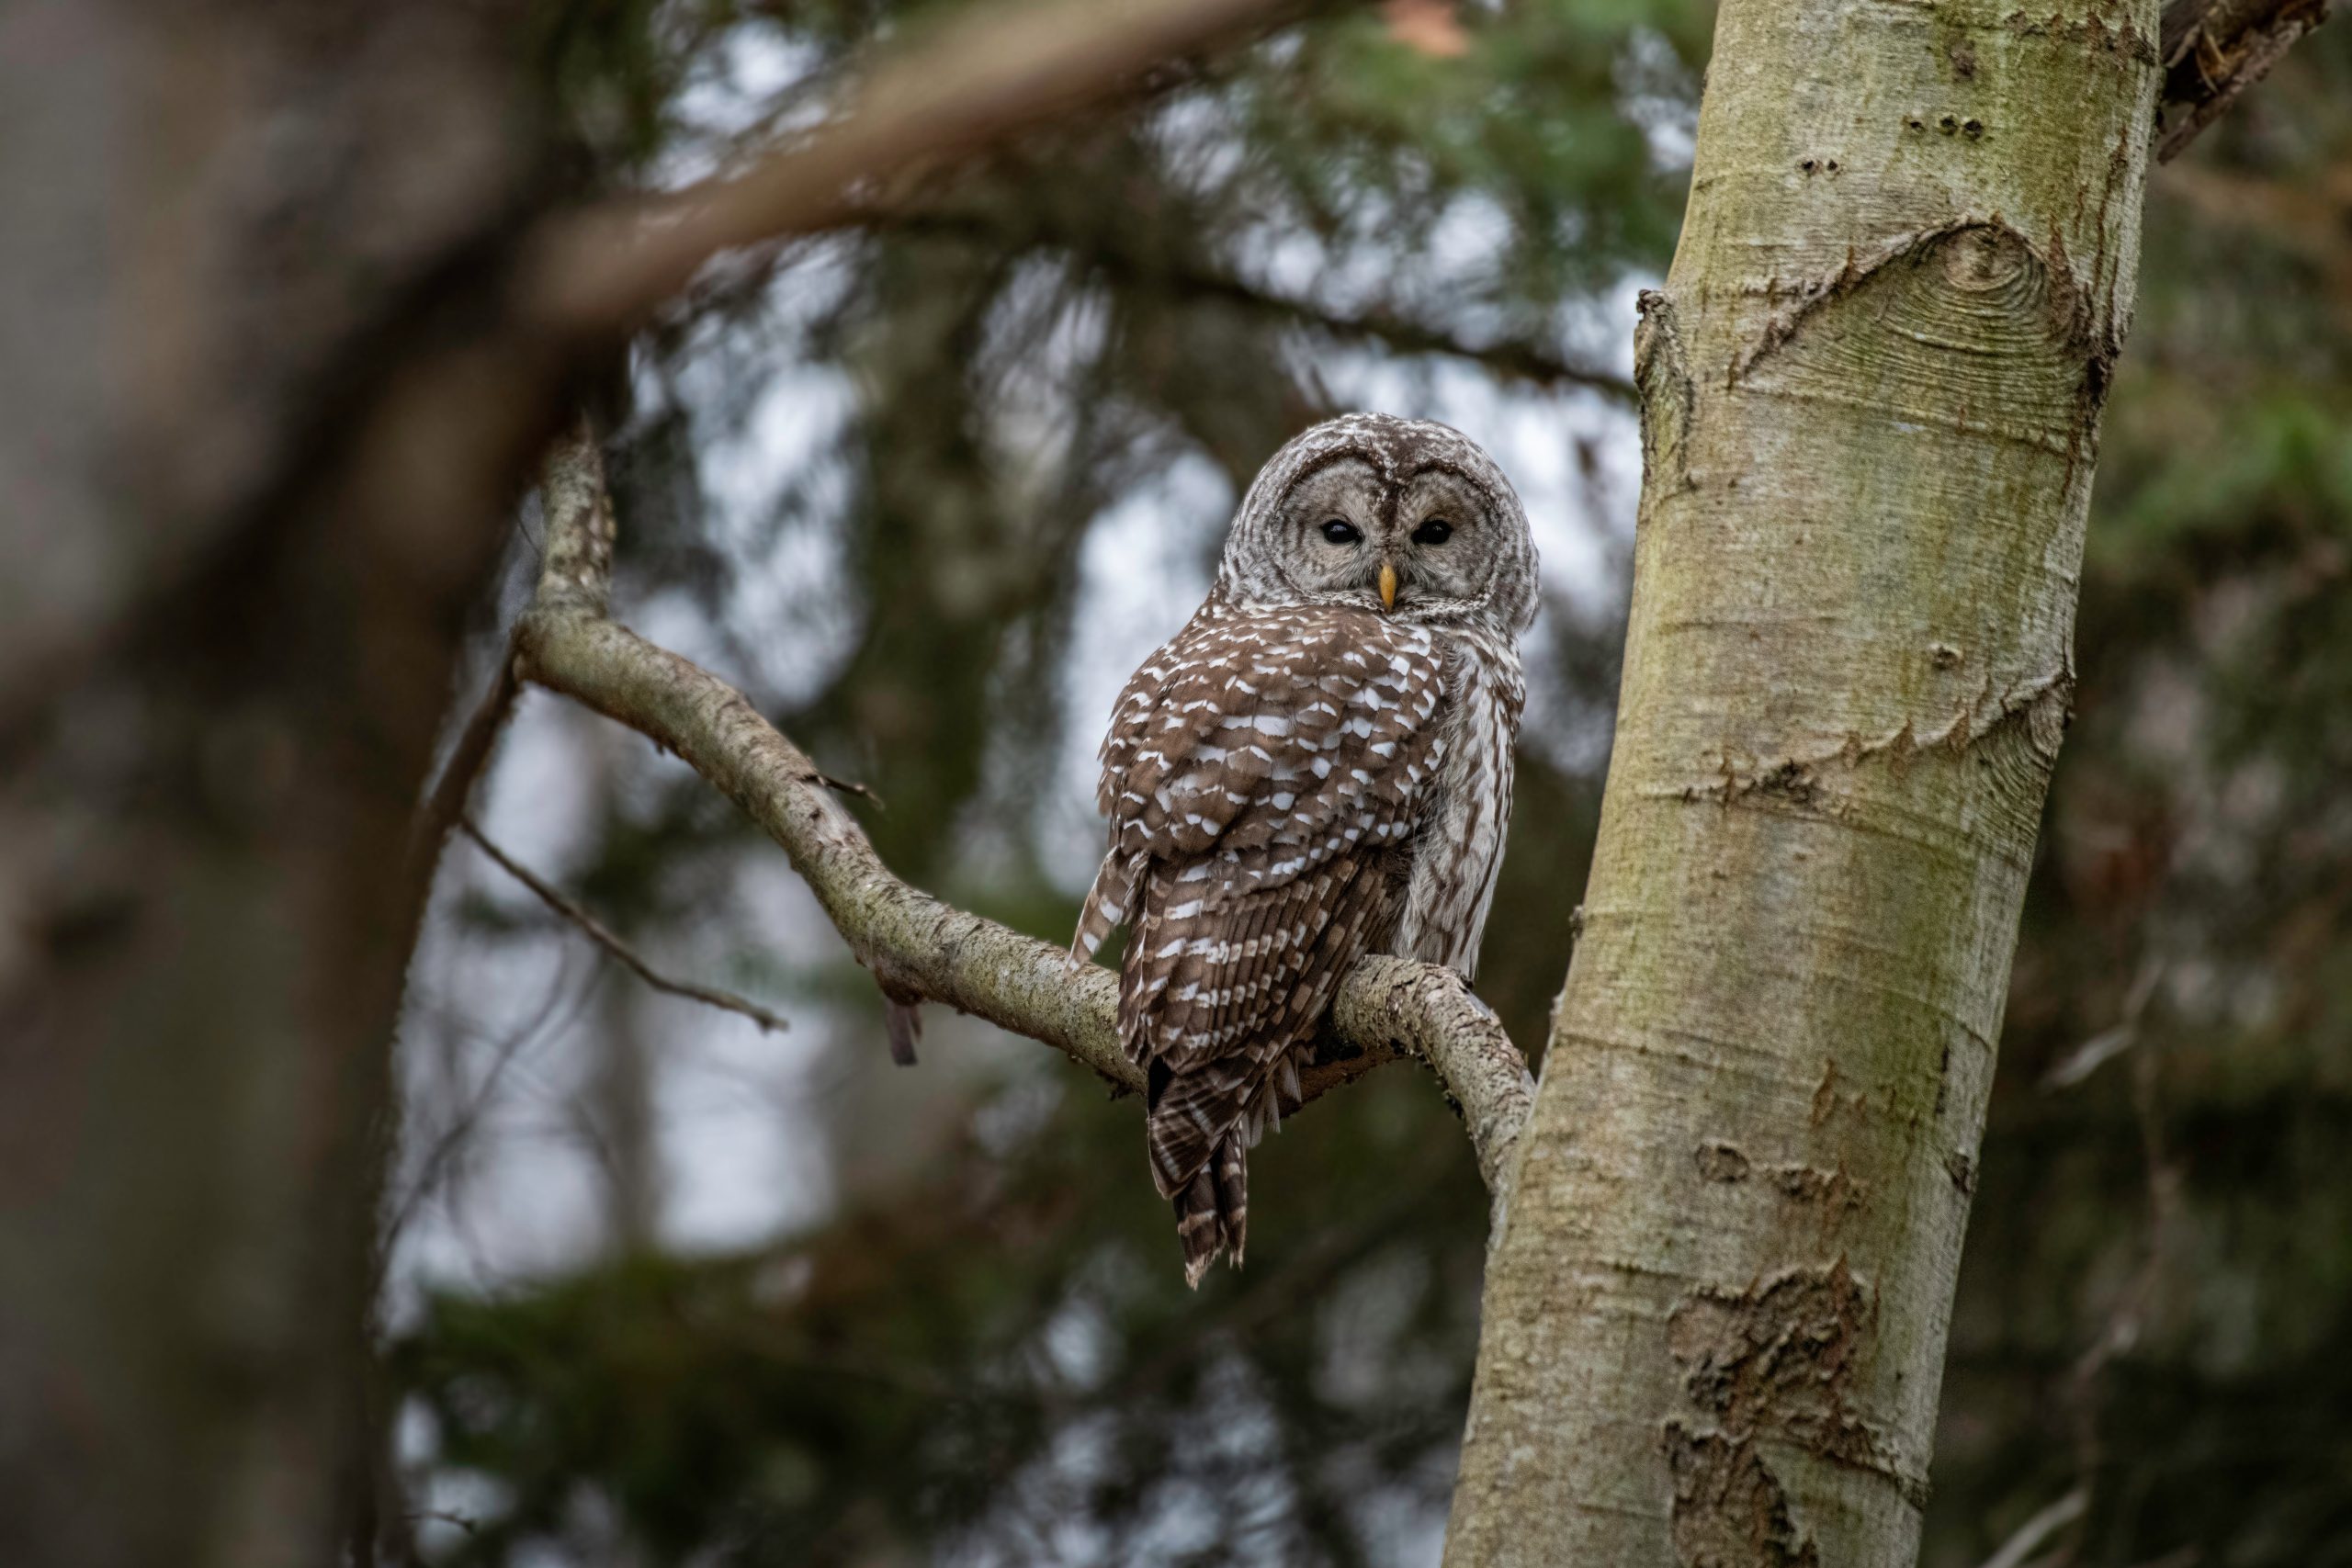 Image shows barred owl in tree